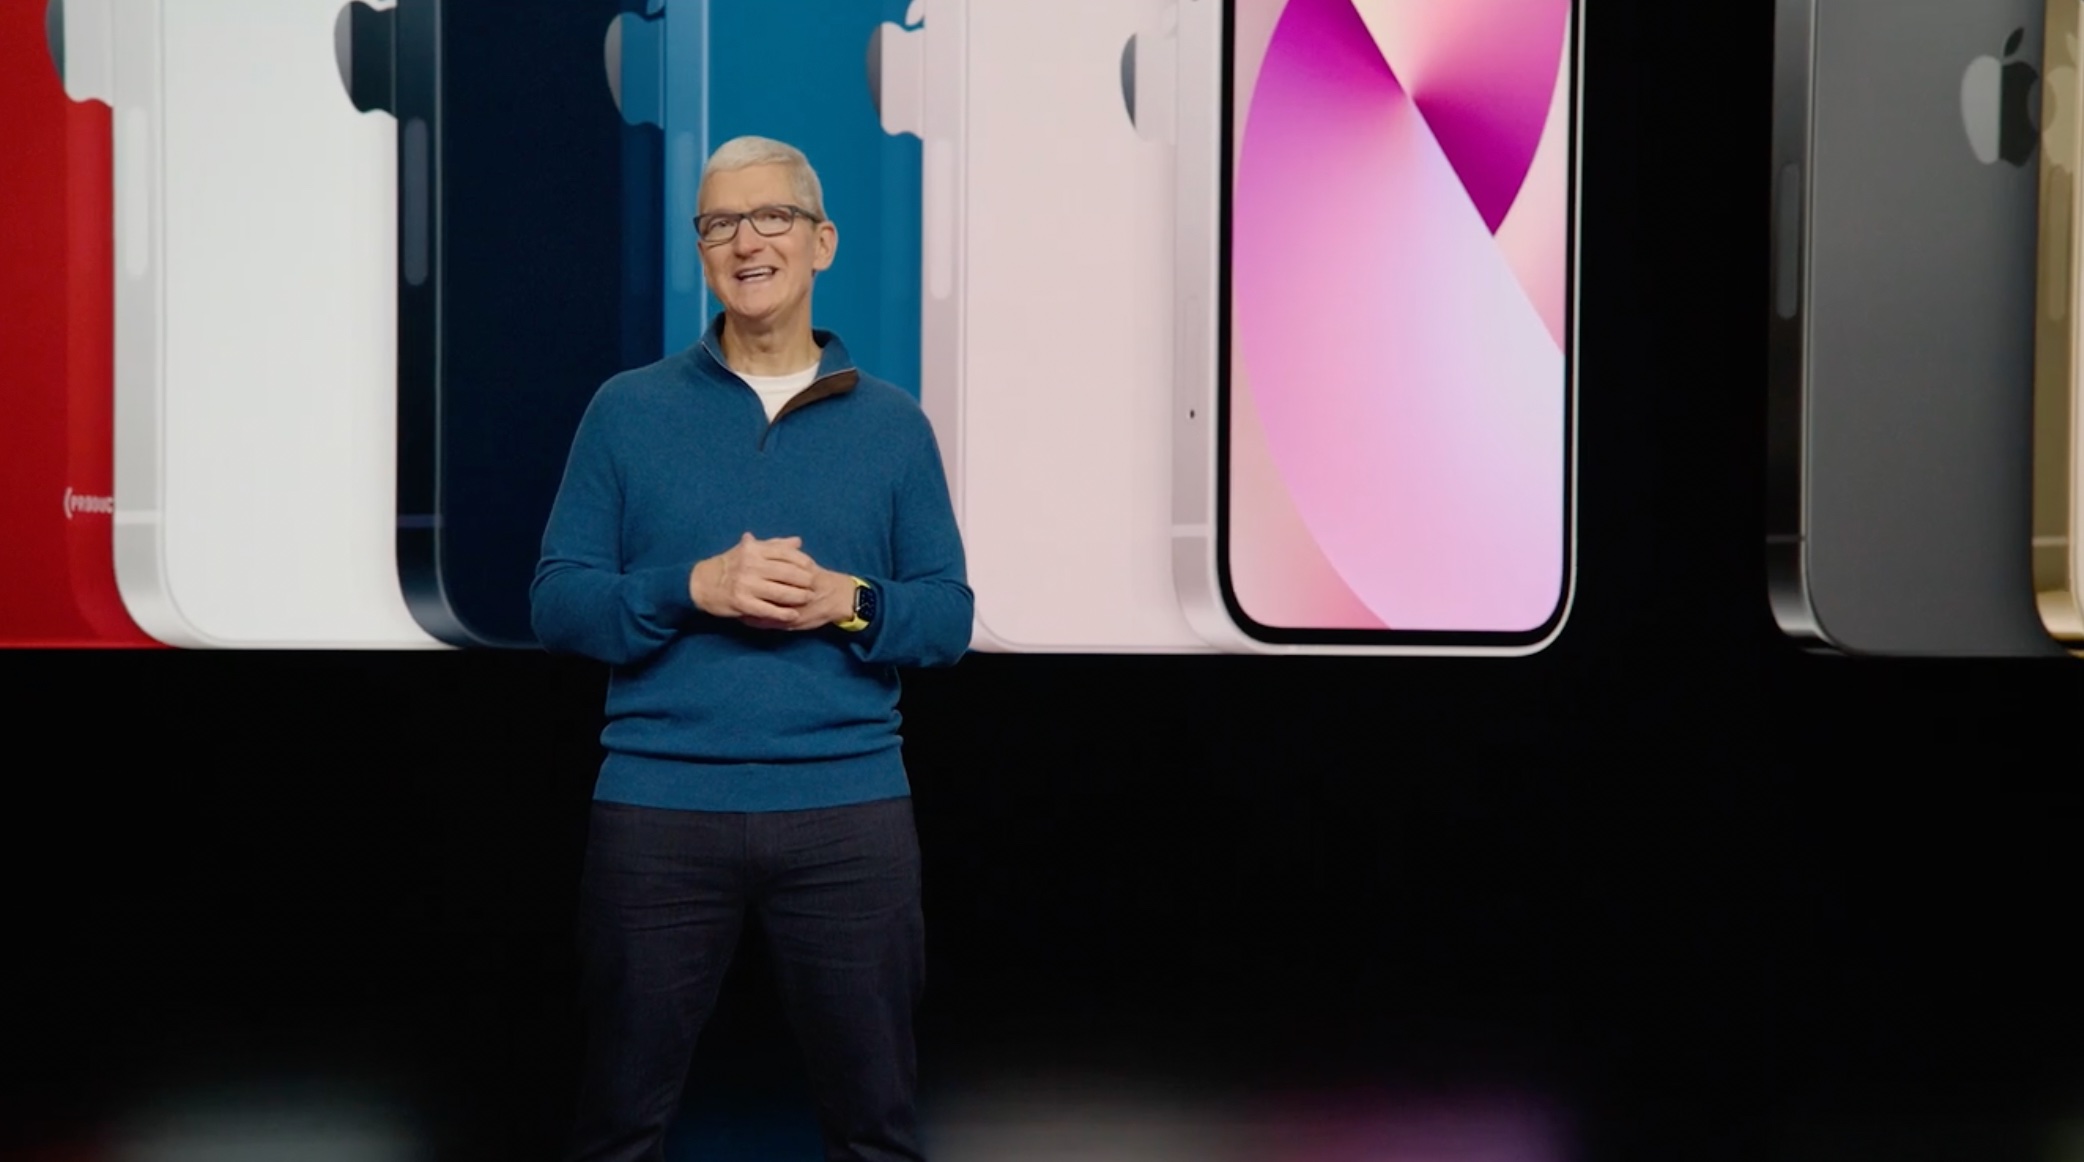 Tim Cook at March Apple event new iPhone 13 colors